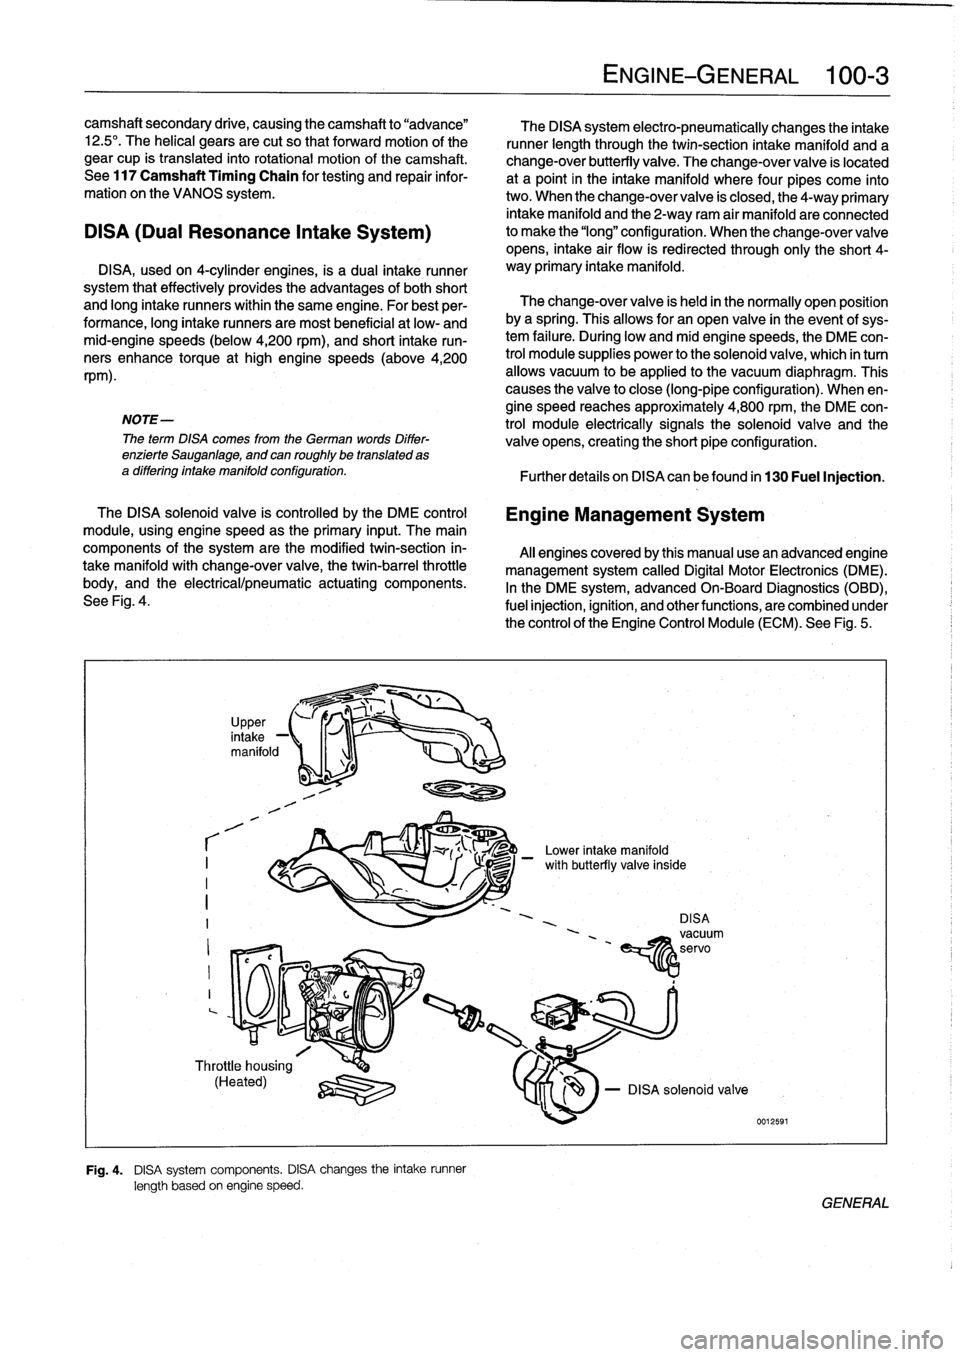 BMW 323i 1995 E36 Service Manual camshaft
secondary
drive,
causing
thecamshaft
to
"advance"

12
.5°
.
The
helical
gears
are
cut
so
that
forward
motion
of
the

gear
cup
is
transiated
into
rotational
motion
of
the
camshaft
.

See
117
